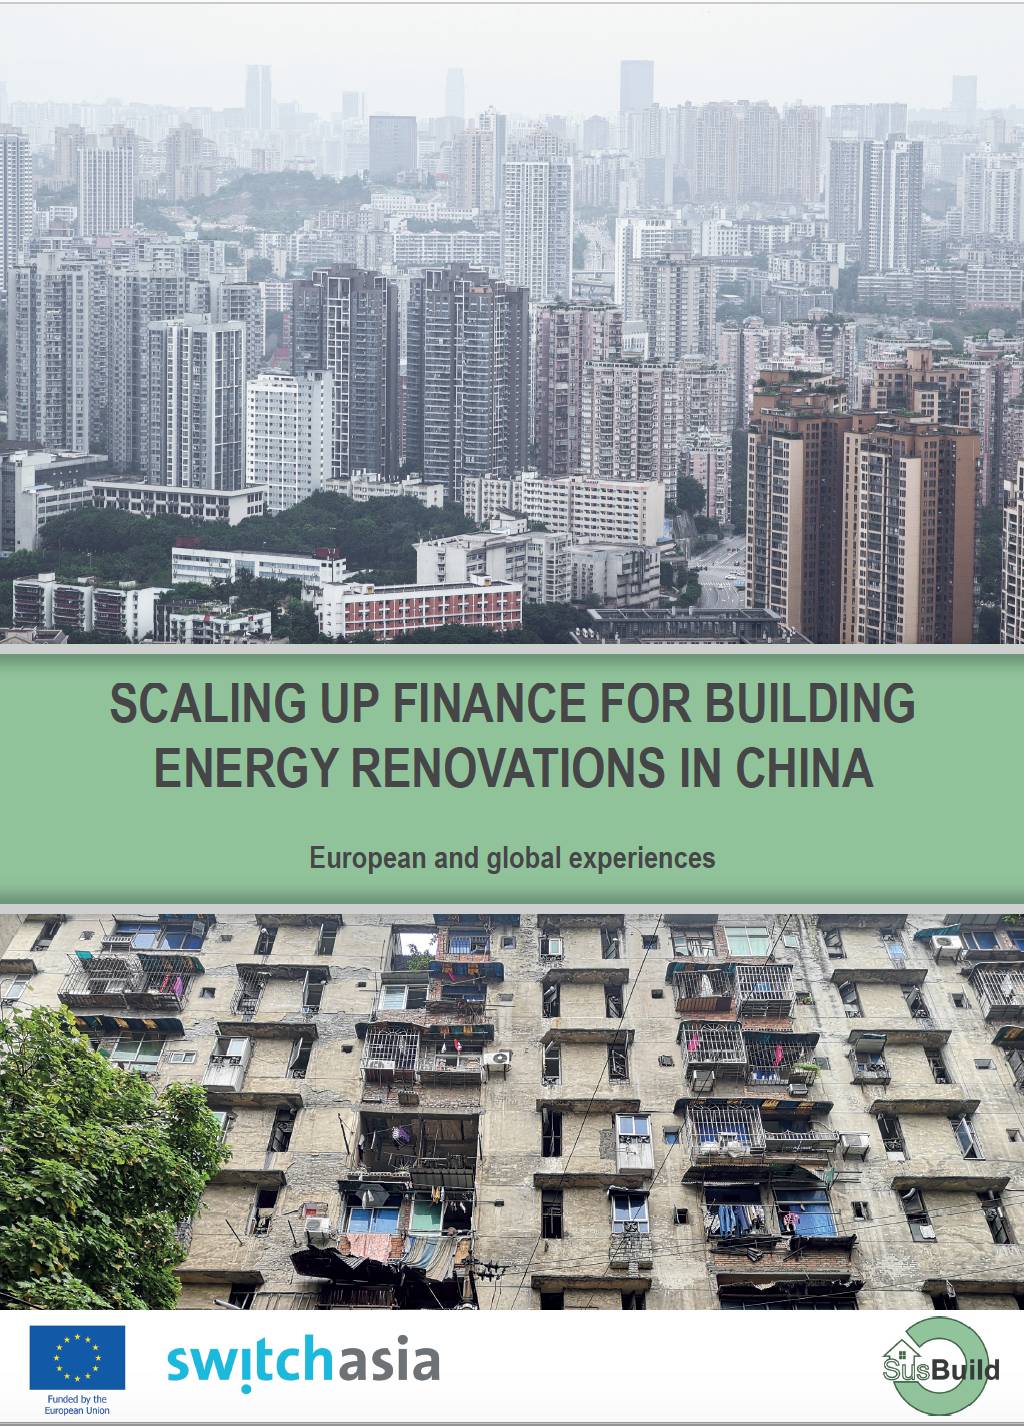 Scaling up Finance for Building Energy Renovations in China - European and global experiences